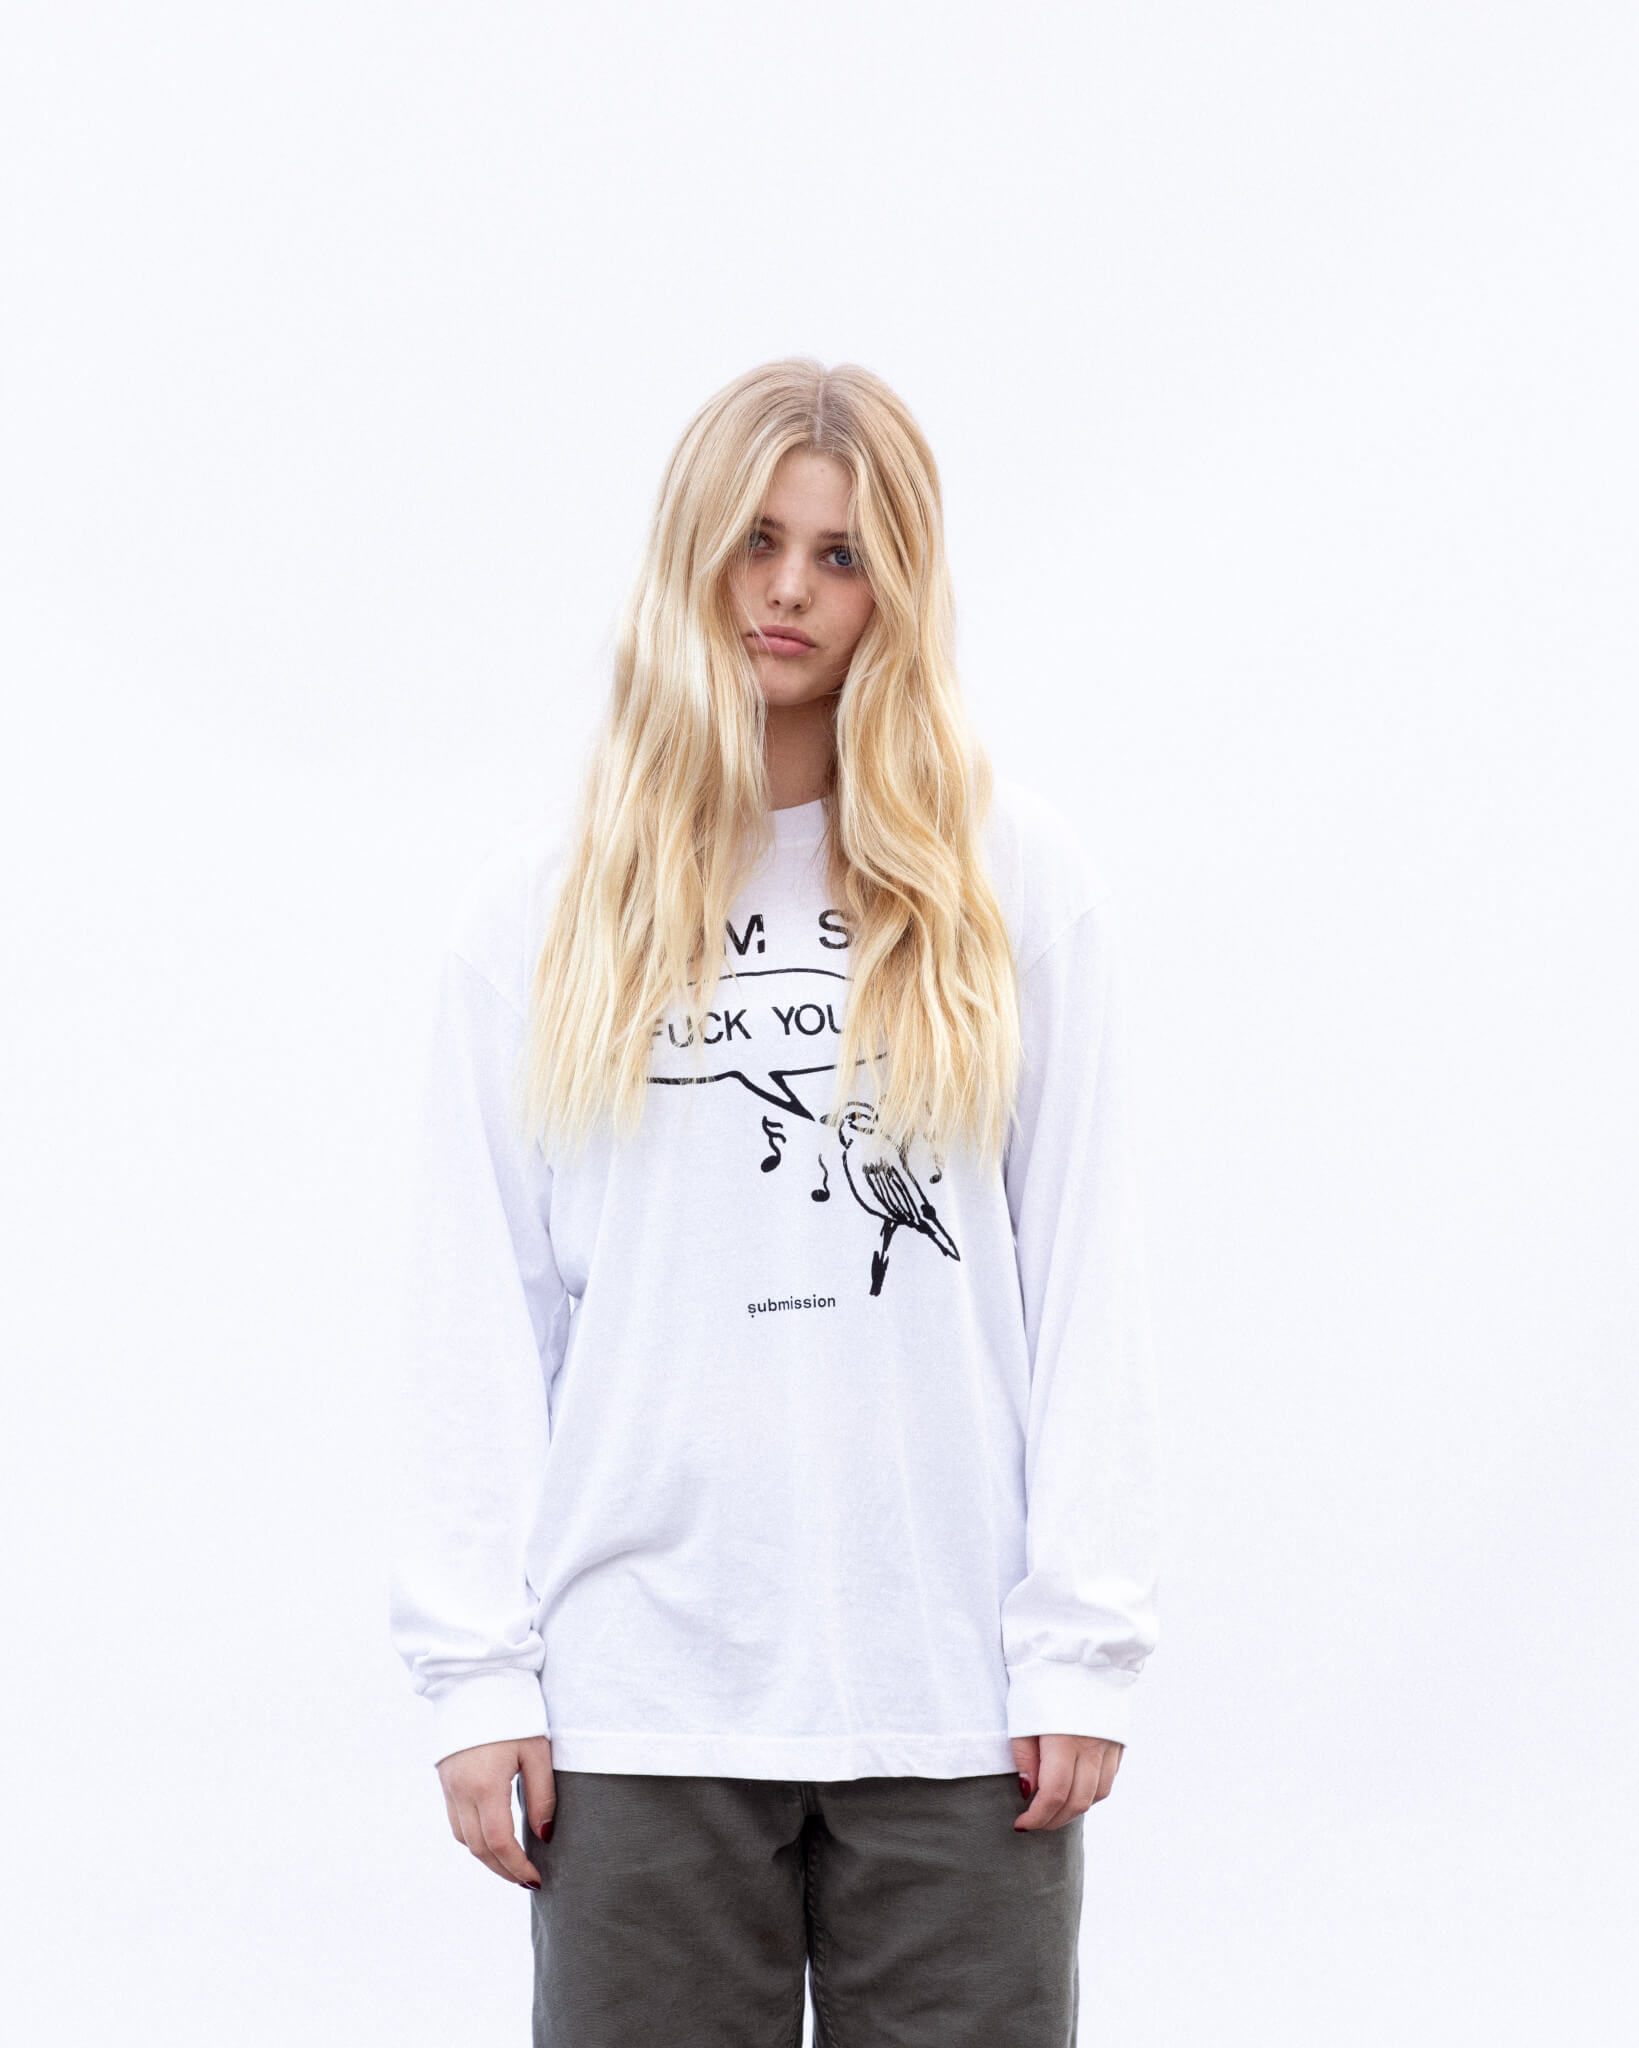 A portrait from the waist up of a young, female-presenting model with a pale complexion, long blonde hair partly obscuring her top, a white long-sleeved crewneck T-shirt with a black-and-white graphic in the center depicting a cartoon bird surrounded by musical notes with a speech bubble in which the words “FUCK YOU” appear in capital letters in quotation marks, above which the words “MOM SAYS” appear in capital letters, and a logo beneath the entire graphic with the word “submission” in bold, lowercase type